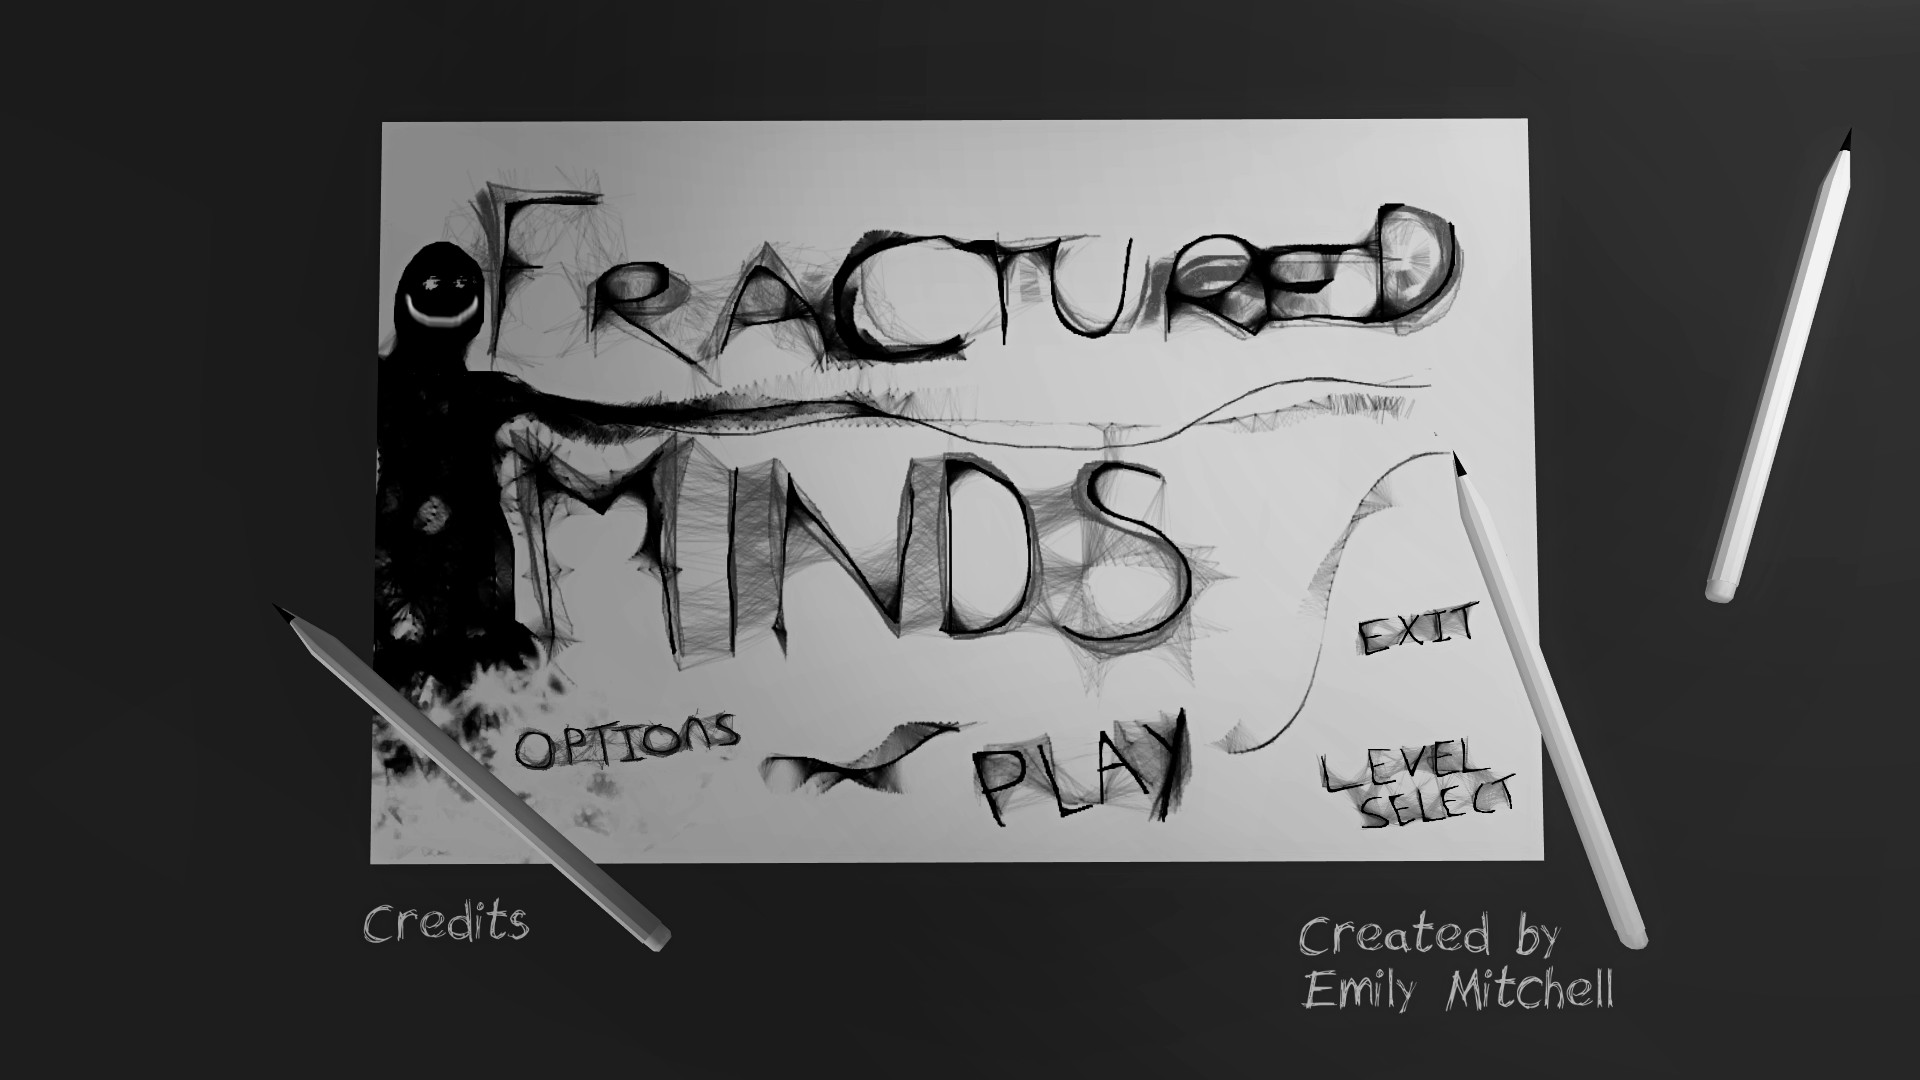 Fractured Minds – A Game That Matters